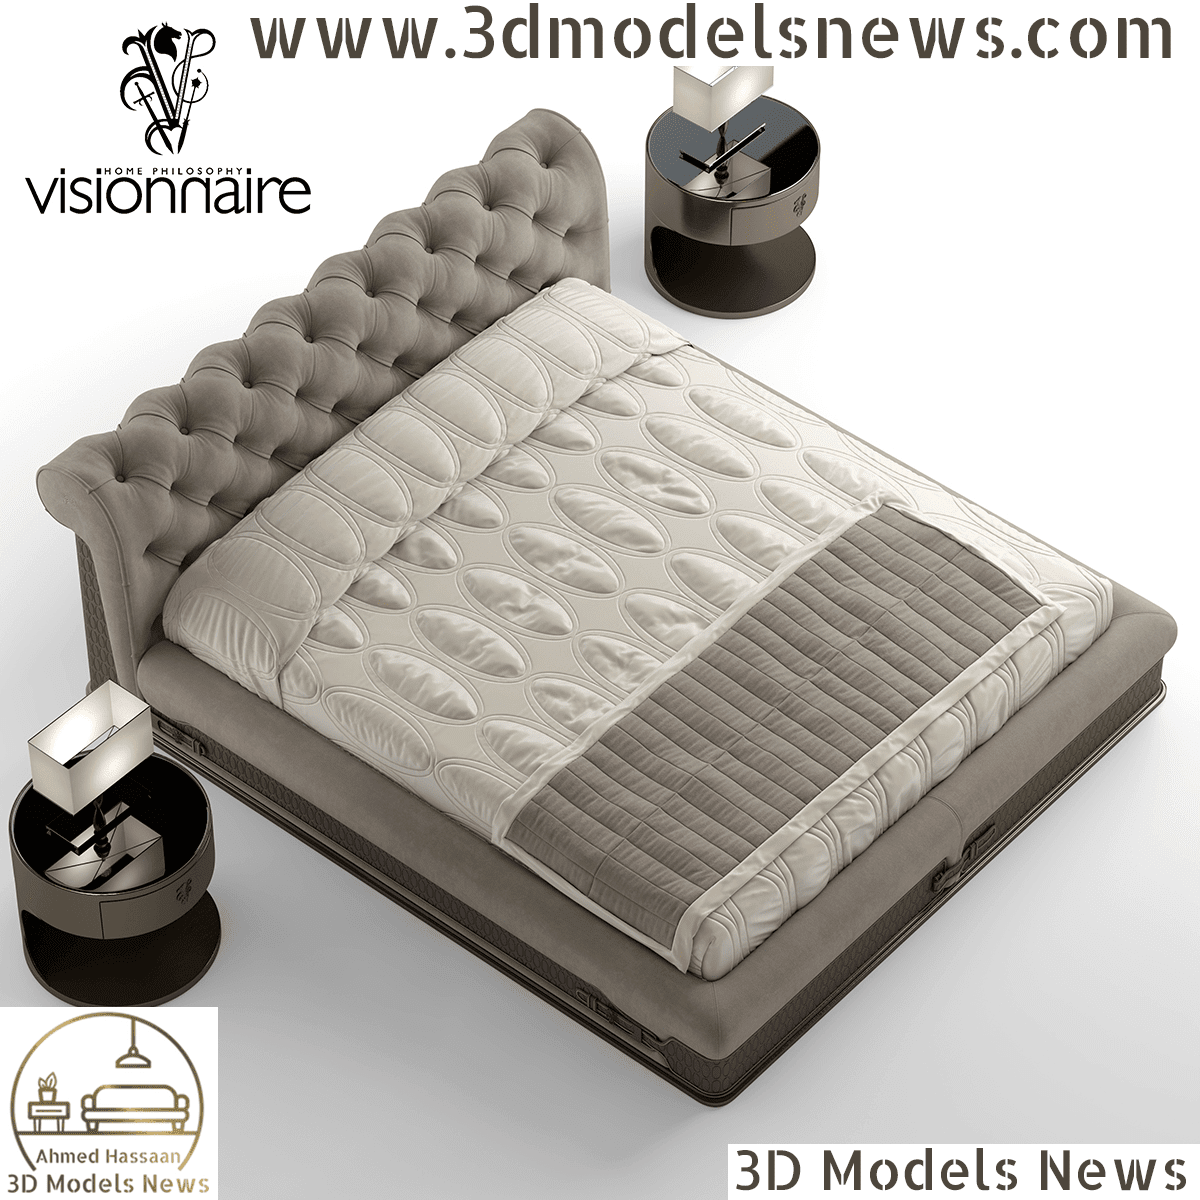 Visionnaire Chester Lawrence bed model 1